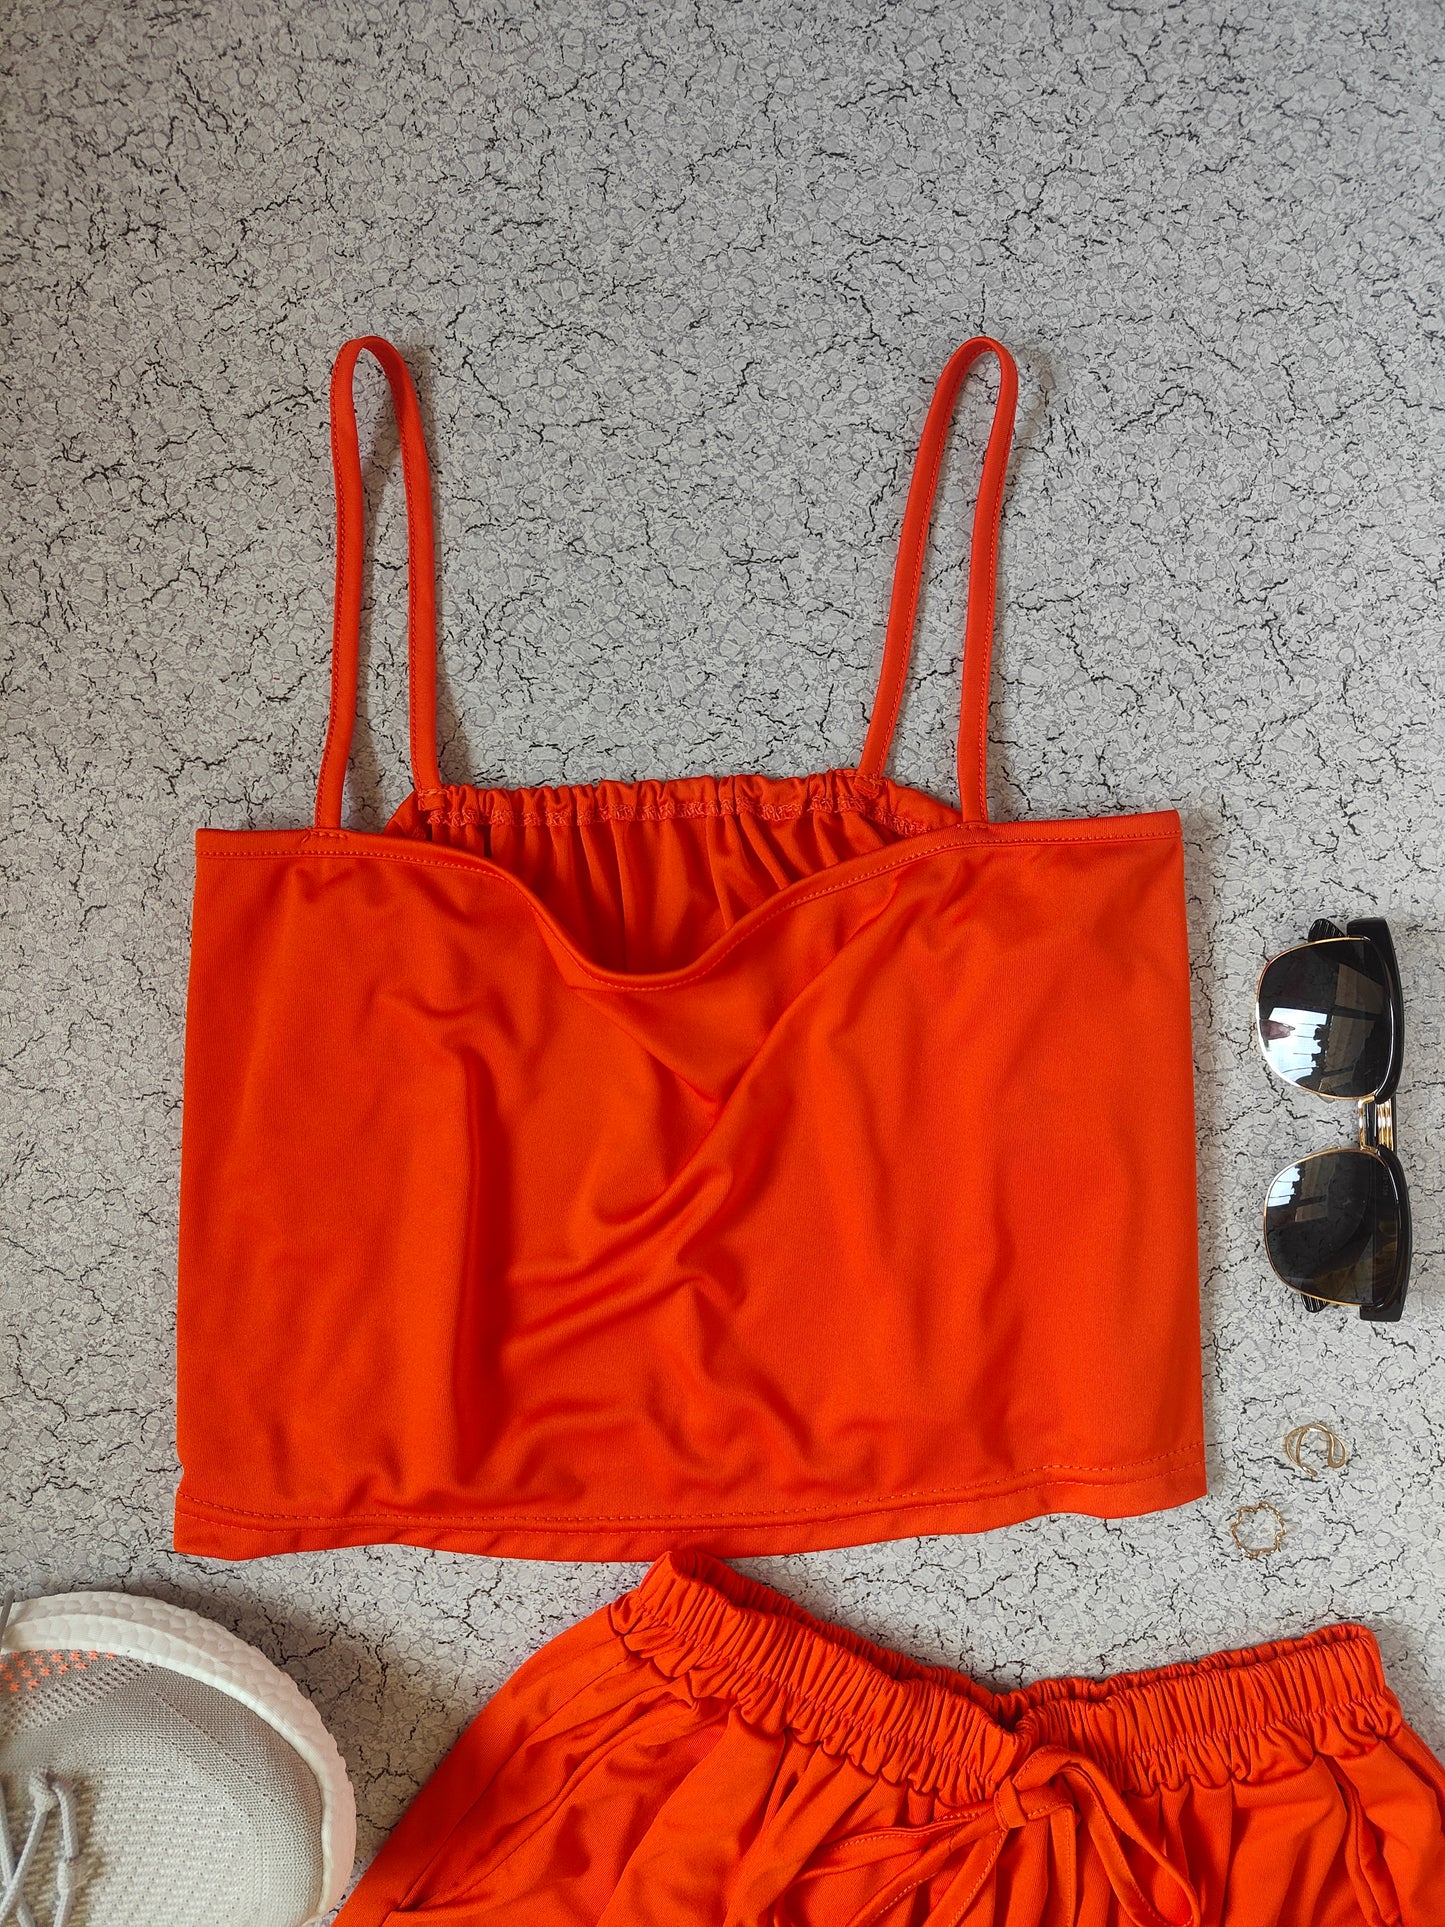 Sunny Citrus Top and Shorts